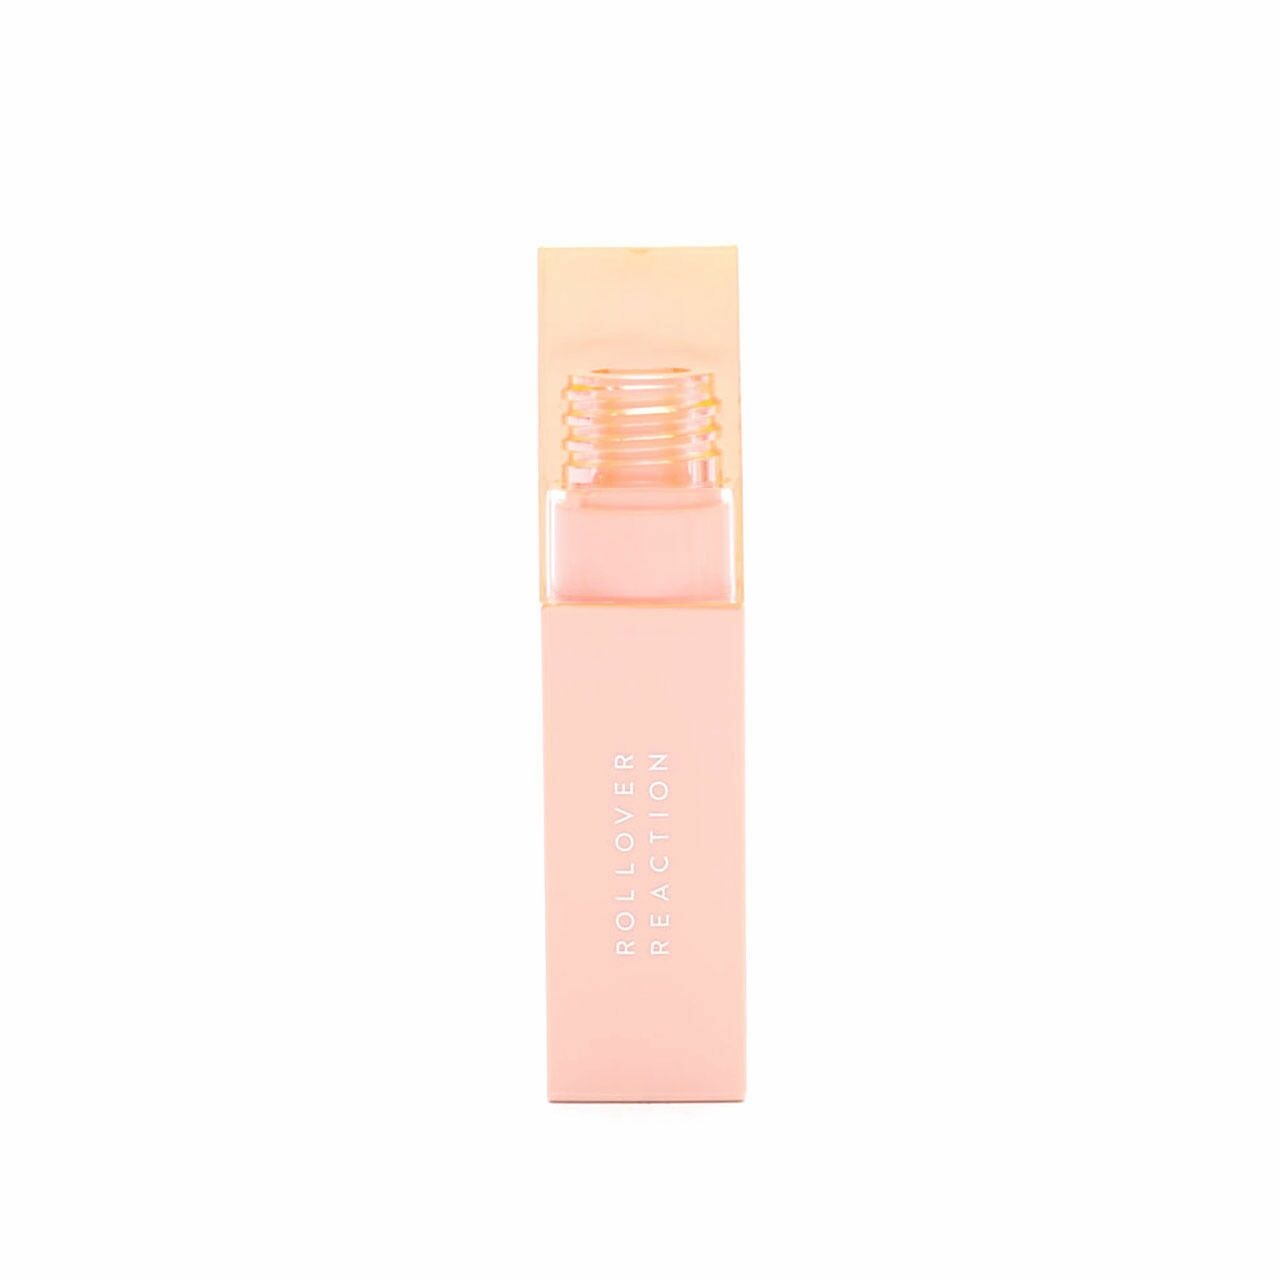 Rollover Reaction DEWDROP! Lip and Cheek Tint Lips	